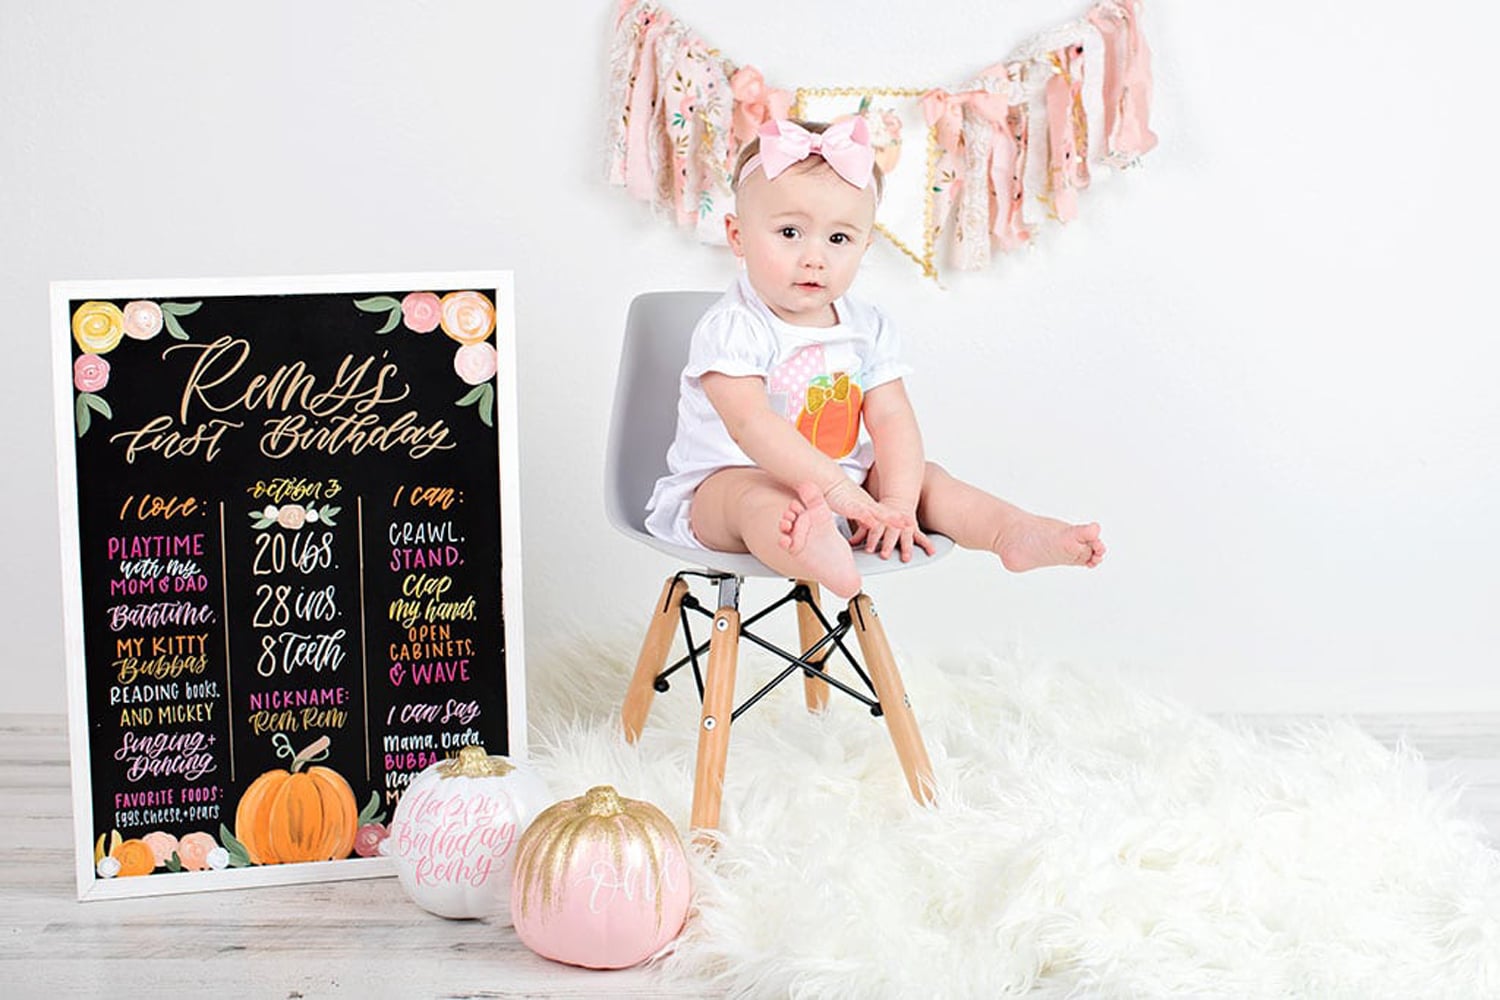 A baby celebrates her first birthday with decorations.